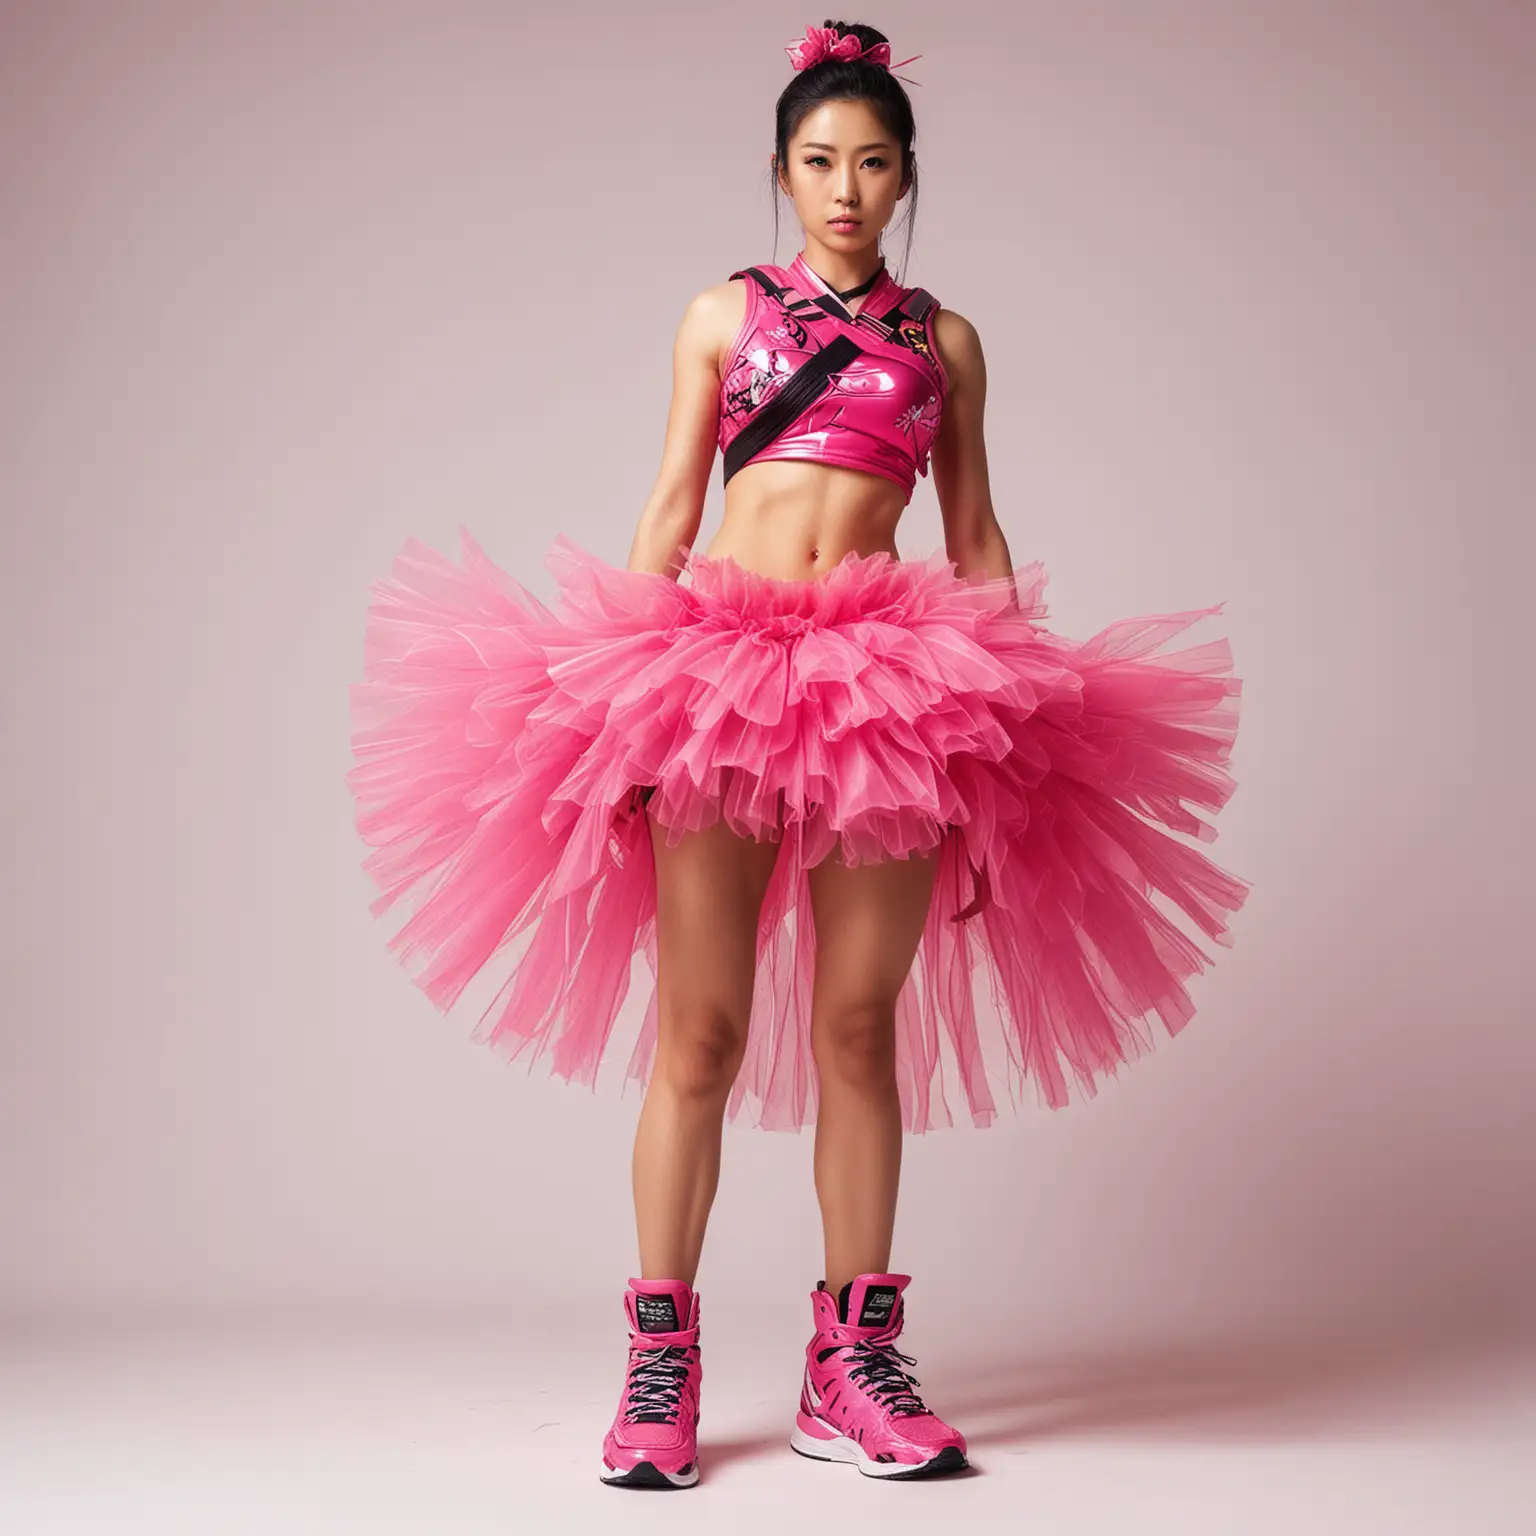 Standing full body view, Japanese bodybuilder supermodel with thin waist and long legs in sleeveless, hot-pink samurai armor, midriff exposed, giant hot-pink tutu, black sneakers, sneakers, white background